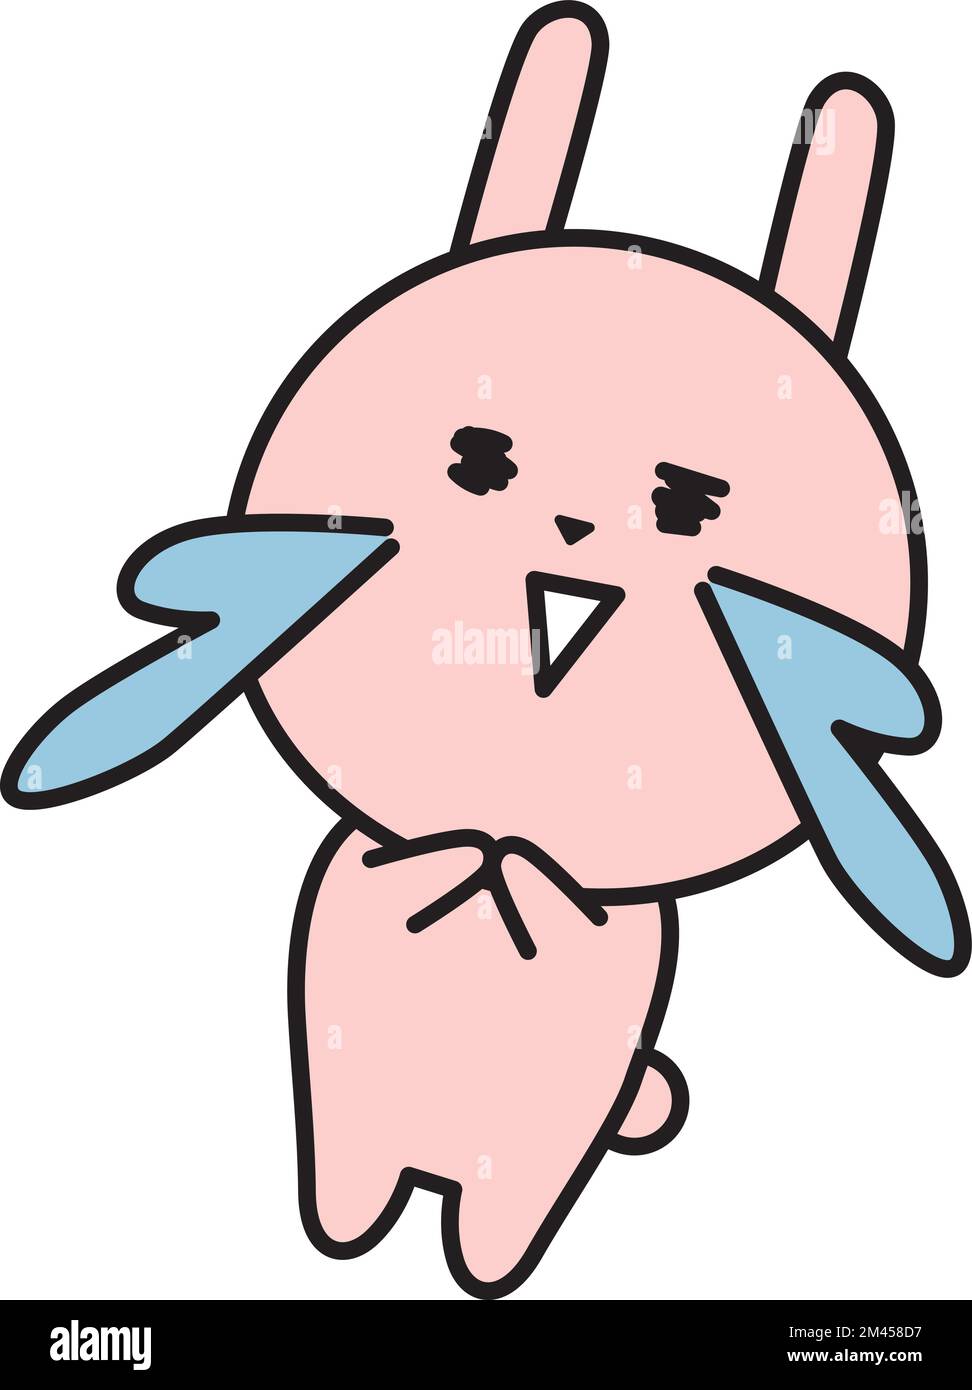 A cute rabbit character cry with joy.  Cute and funny animal is expressing emotion. Stock Vector